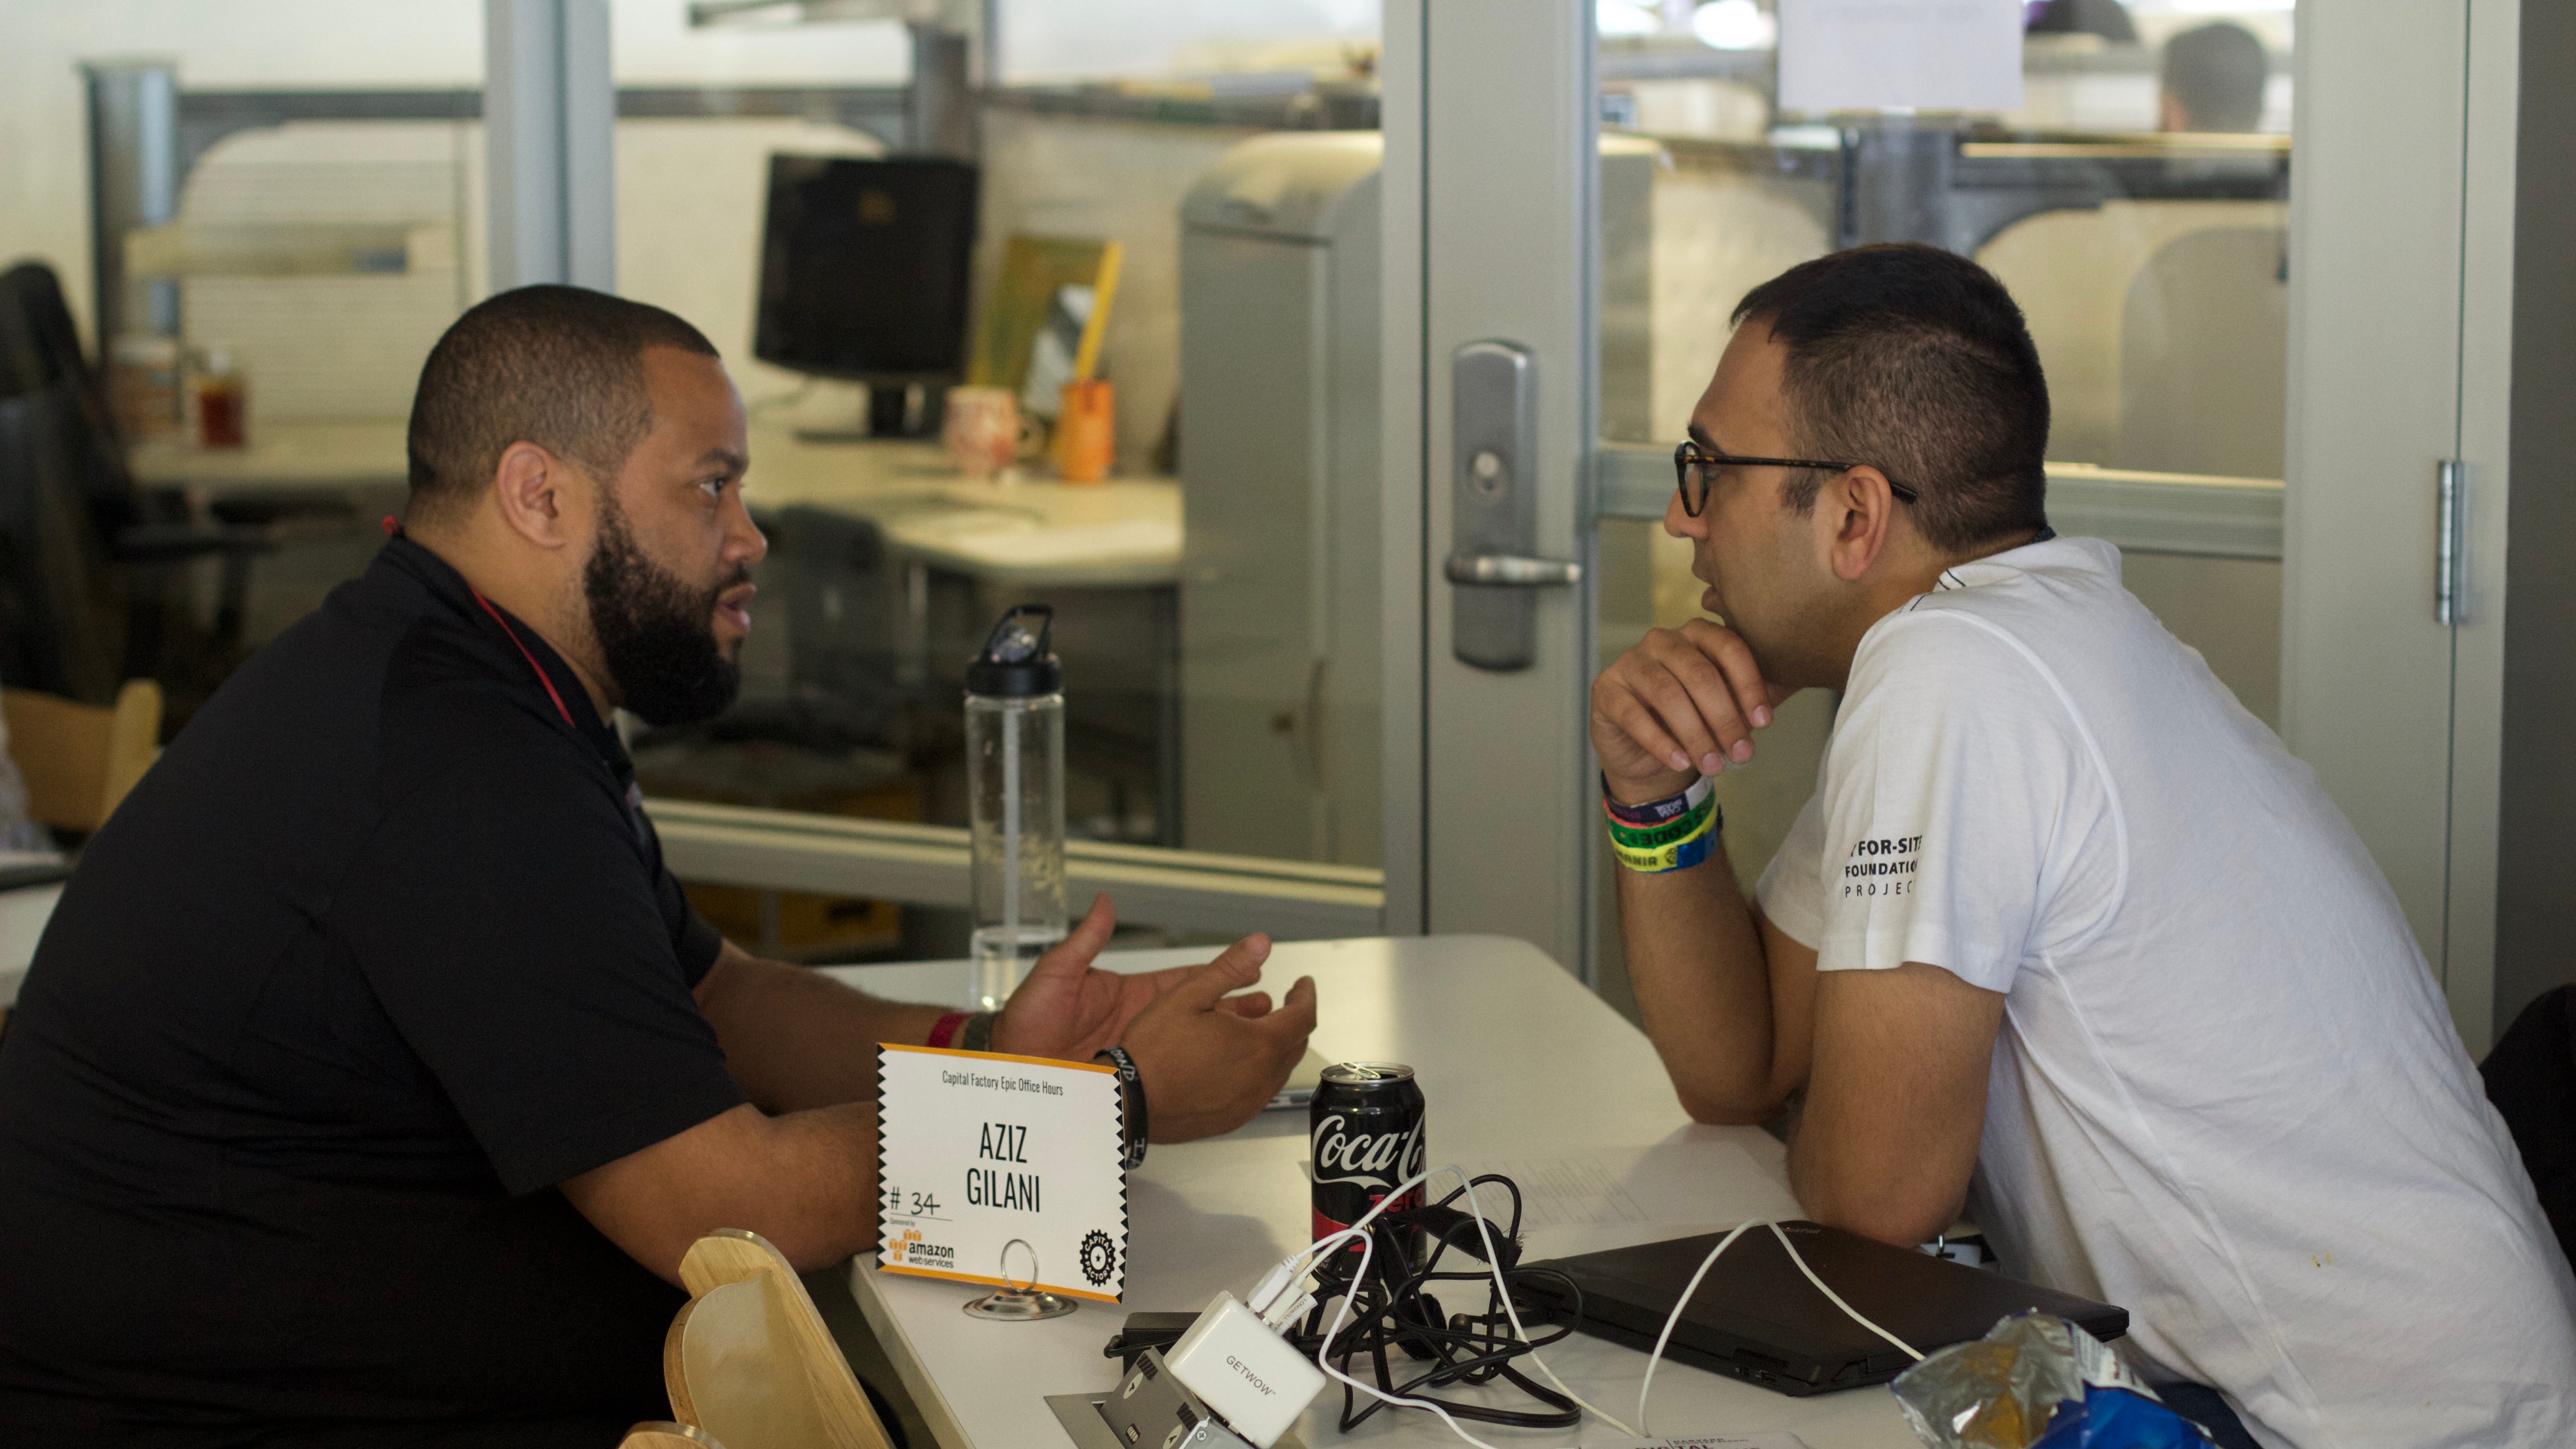 10 tips on how to get meaningful outcomes from mentor office hours meetings  at Capital Factory | by Joshua Baer | Aug, 2020 | Austin Startups